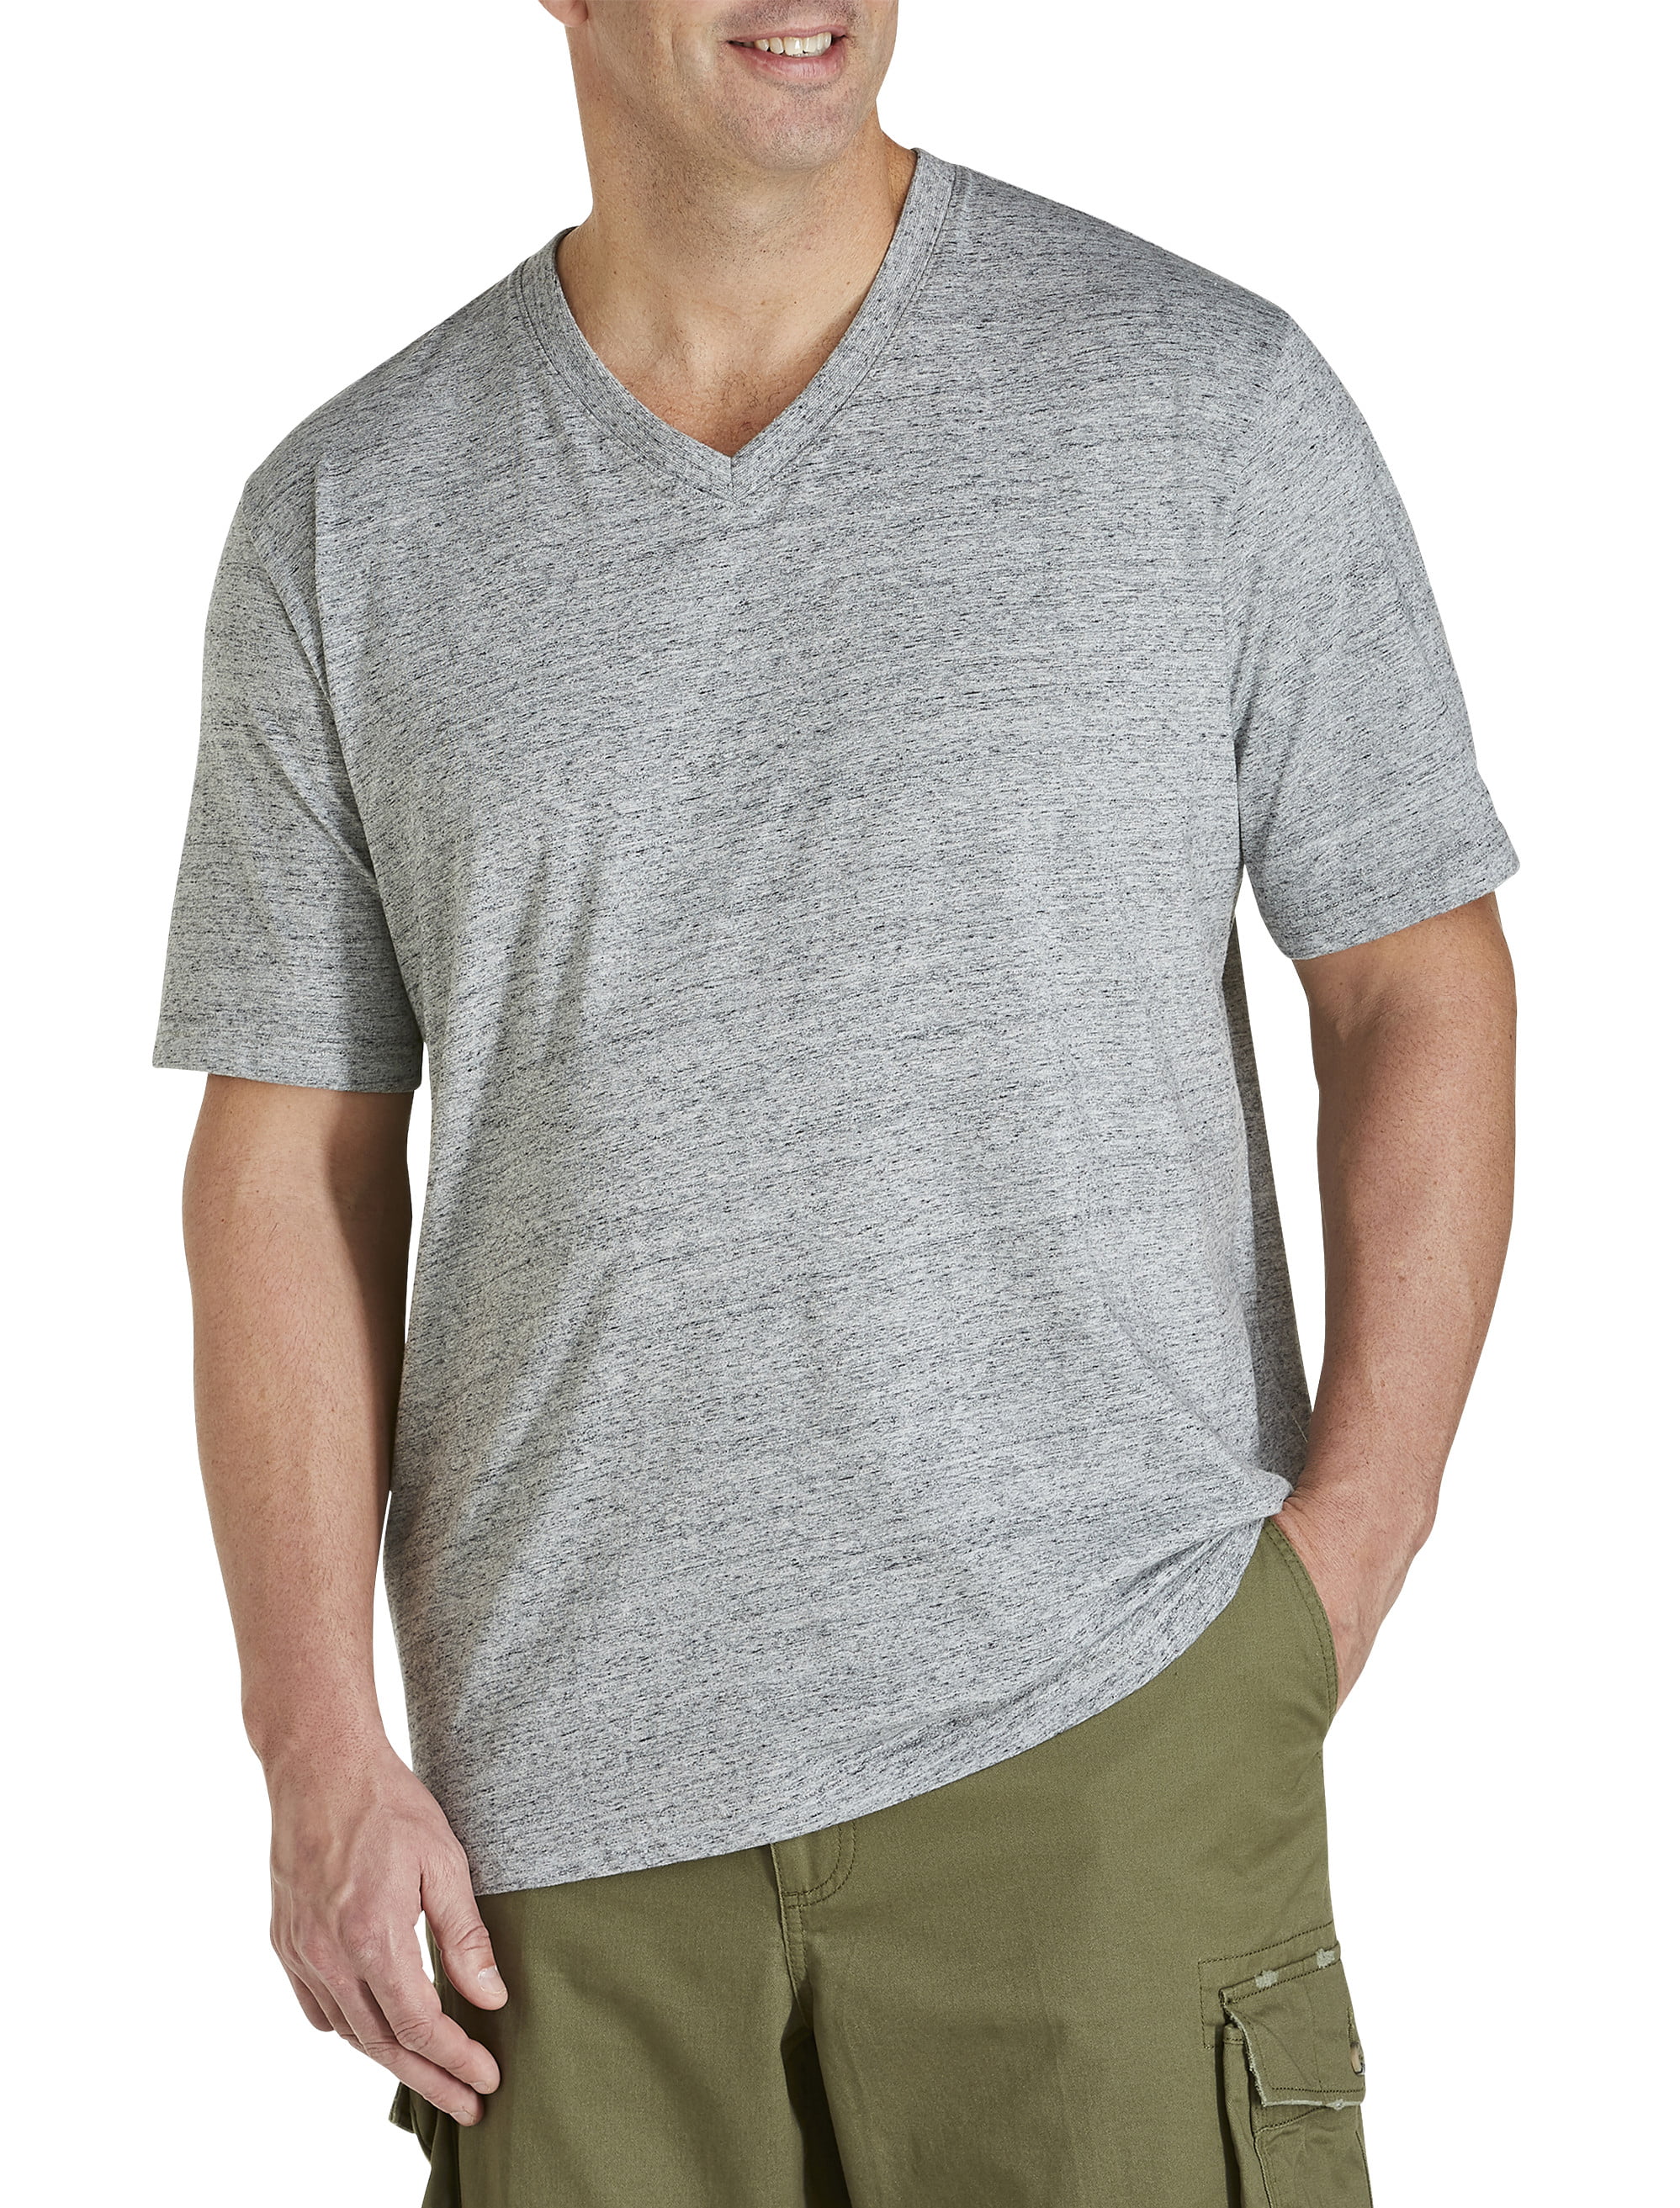 Harbor Bay by DXL Big and Tall V-Neck T-Shirt 3-Pack 